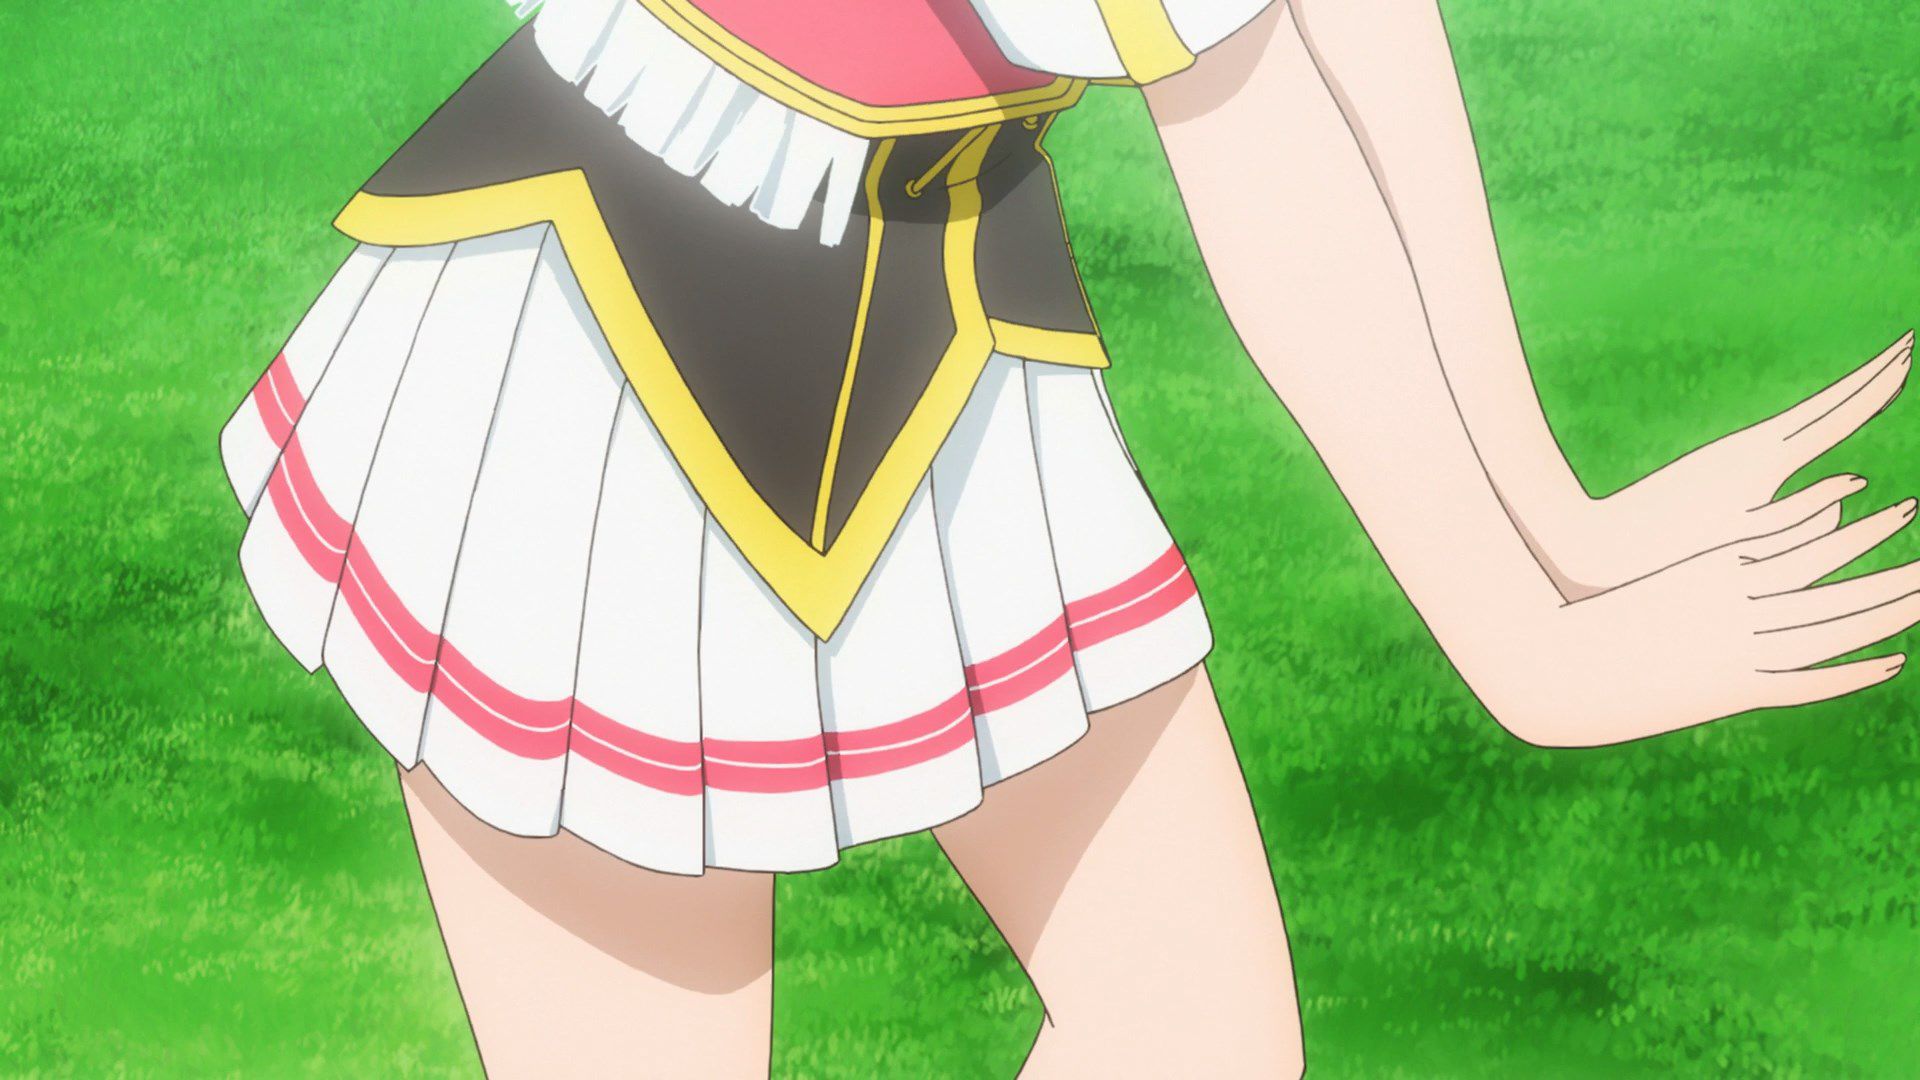 [God images] "love live! ' Μm ' PV's leg is too erotic everyone wakes up to a leg fetish of wwwww 5